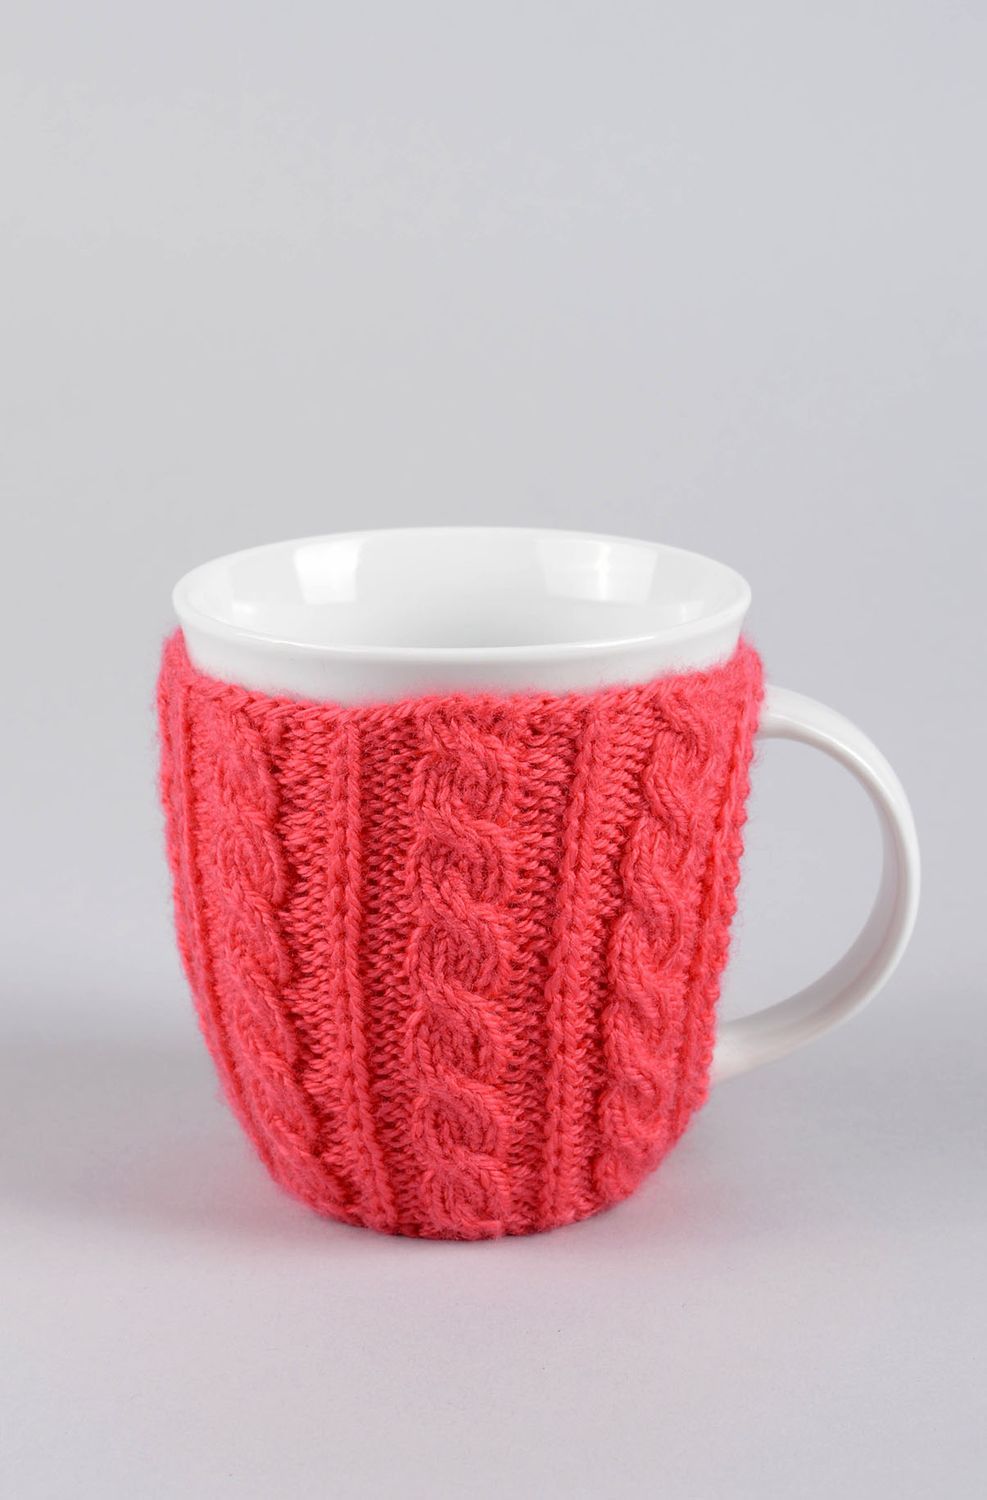 Ceramic cup in white color with re knitter cover 8 oz, 0,67 lb photo 1